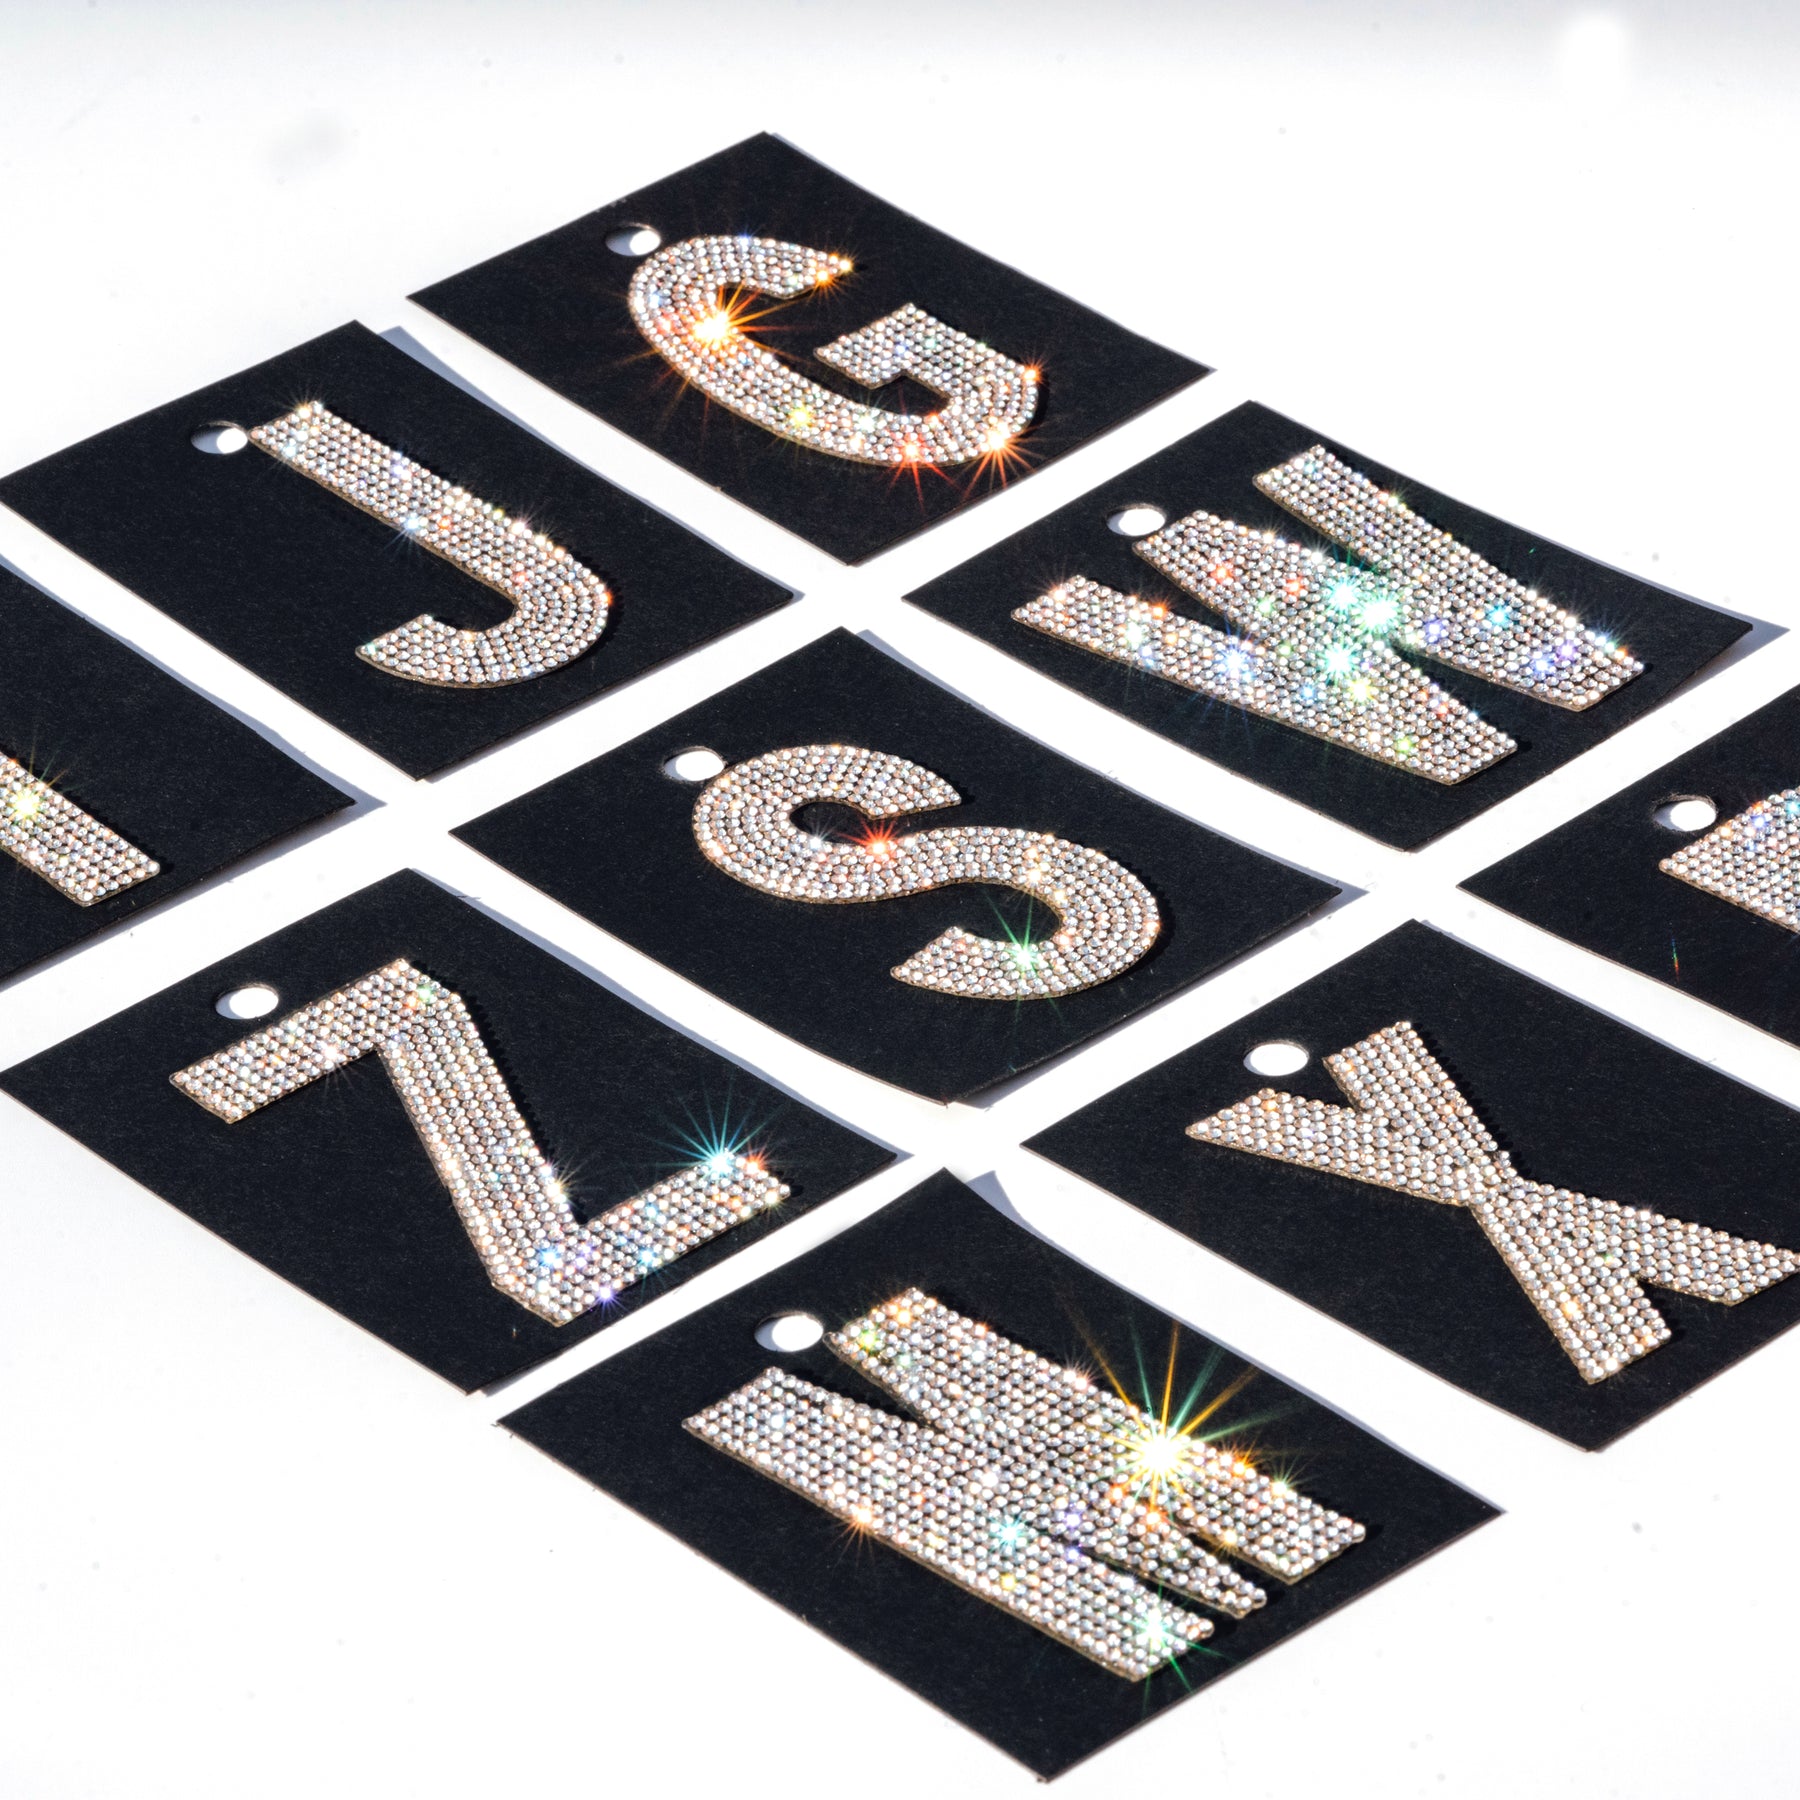 R LETTER Rhinestone Iron on Heat Transfer, Iron on Patches Letters